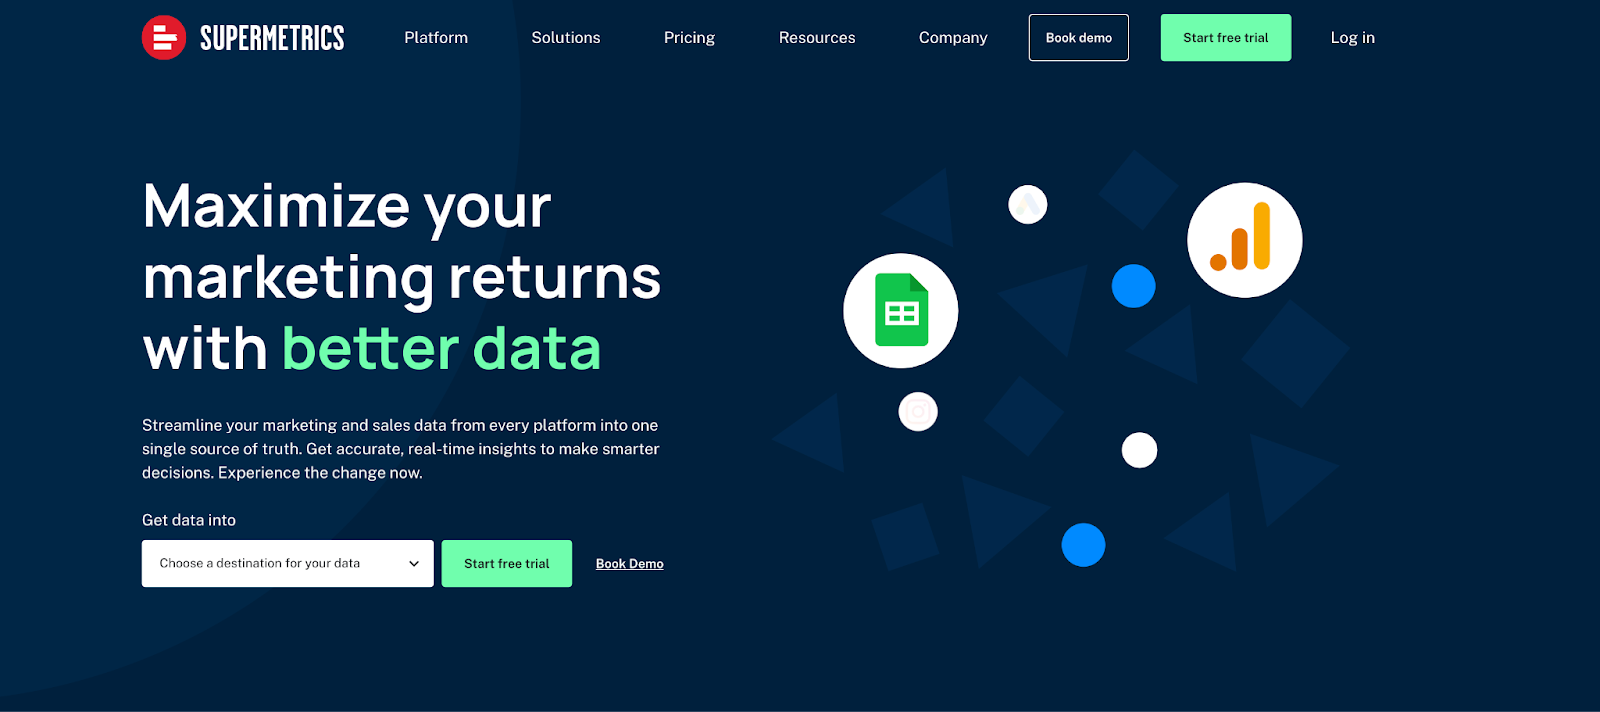 Ecommerce reporting tool, Supermetrics homepage with illustrations of data.